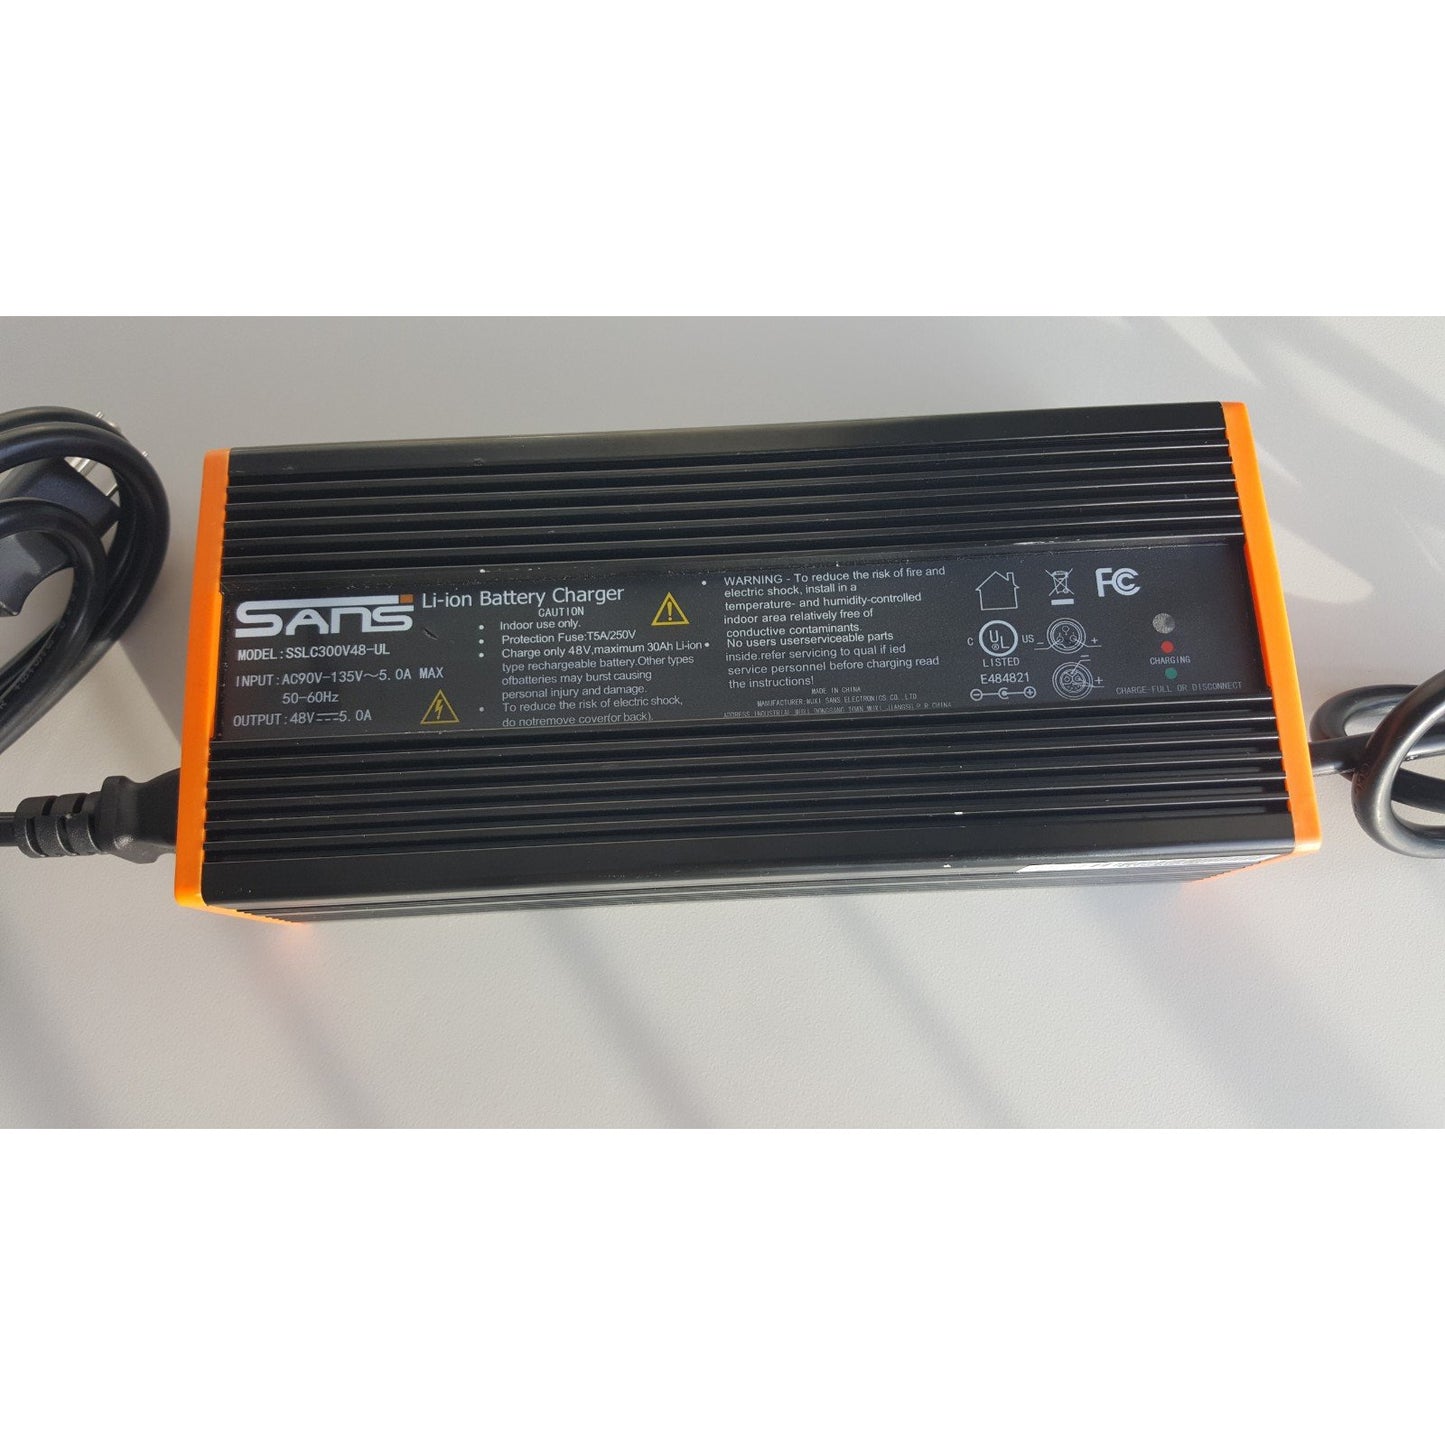 Big Cat electric bike fast charger for 48V lithium ion battery ebike